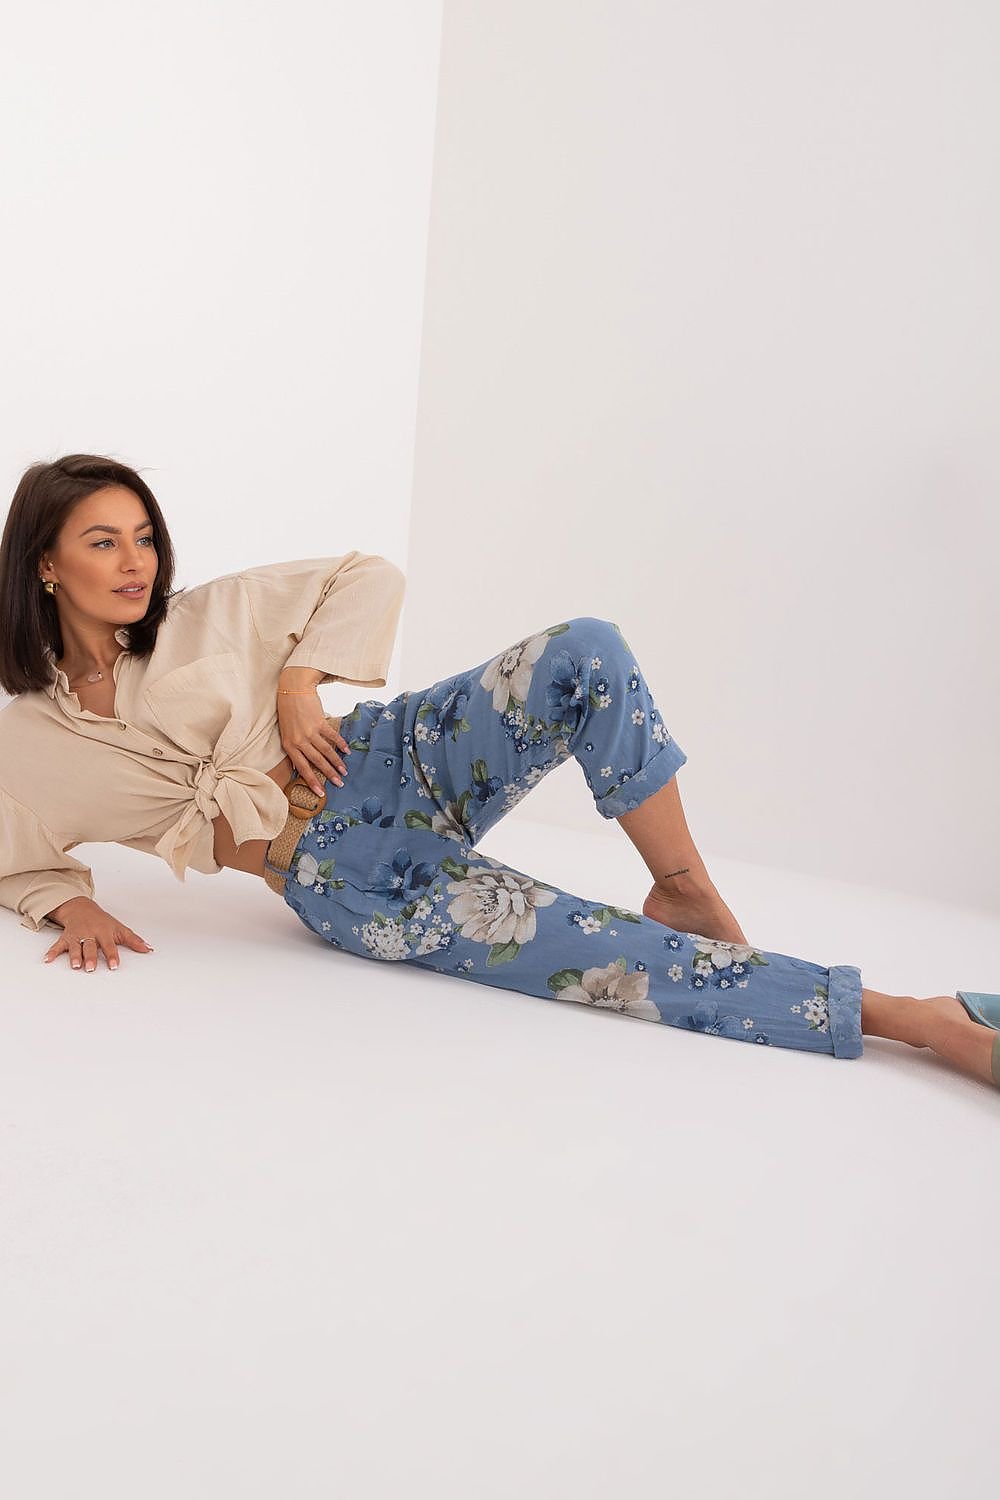 Summer Serenity Floral Trousers